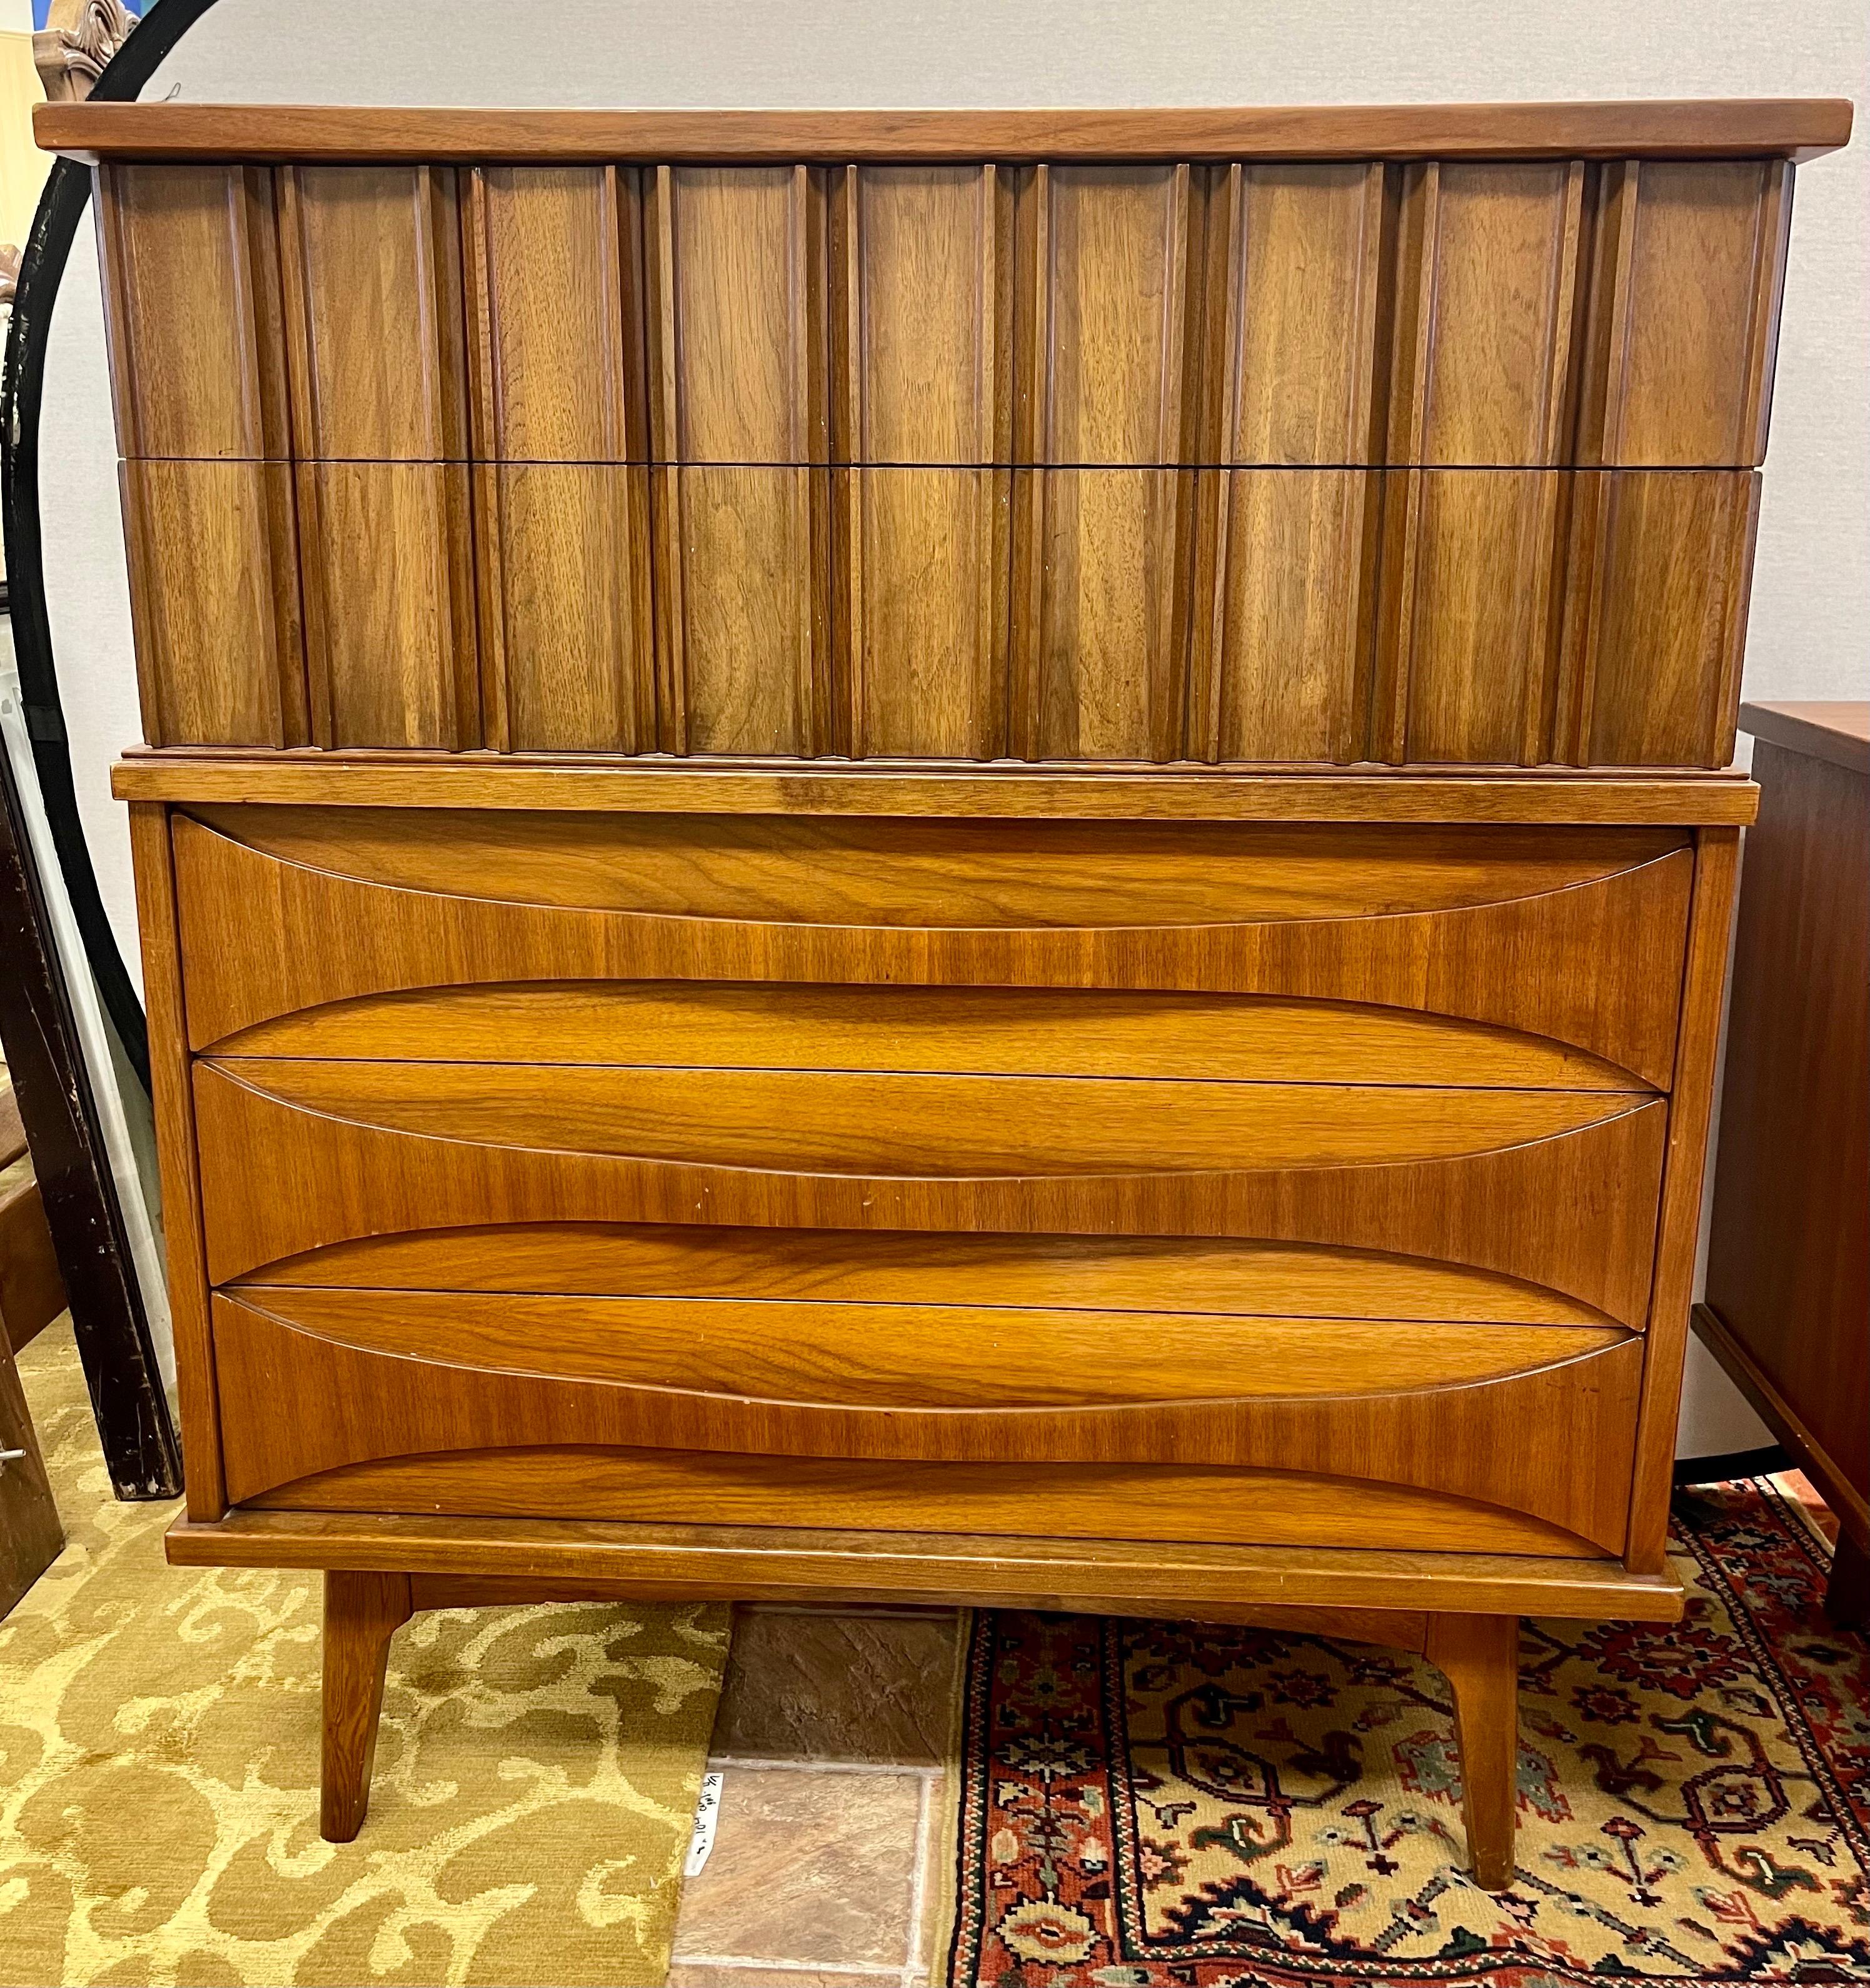 Fabulous sculptural walnut mid century/brutalist dresser made by United Furniture company. This piece features iconic lines and great scale with plenty of storage. Note the coveted carved drawer fronts. Multi-purpose piece at its best.
        